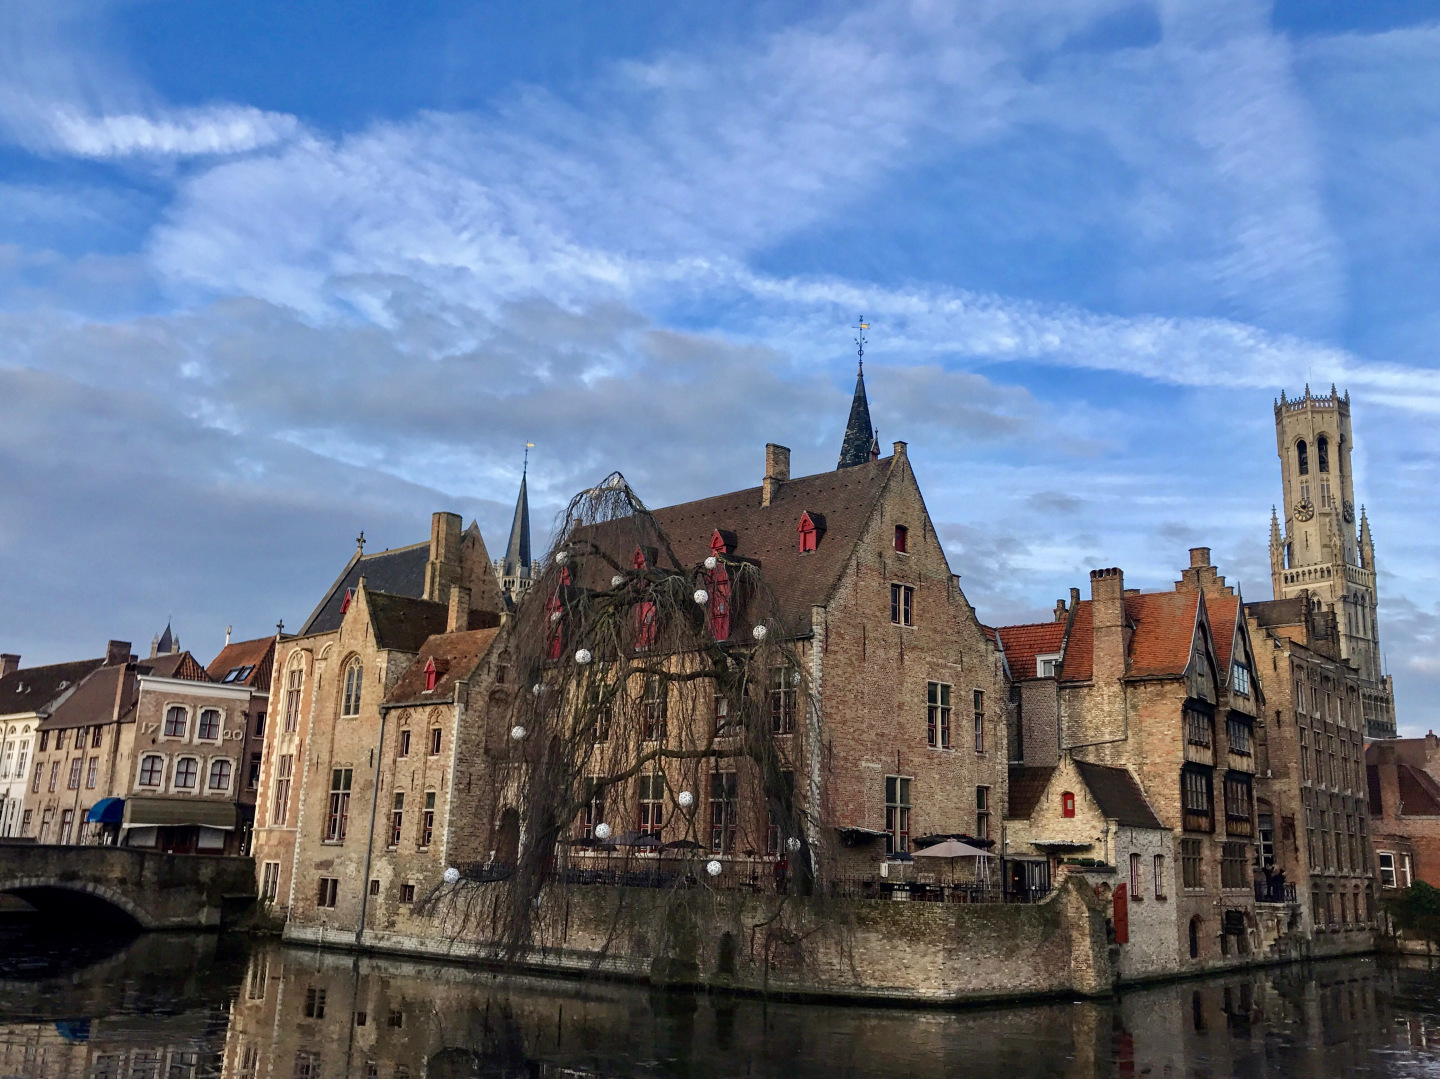 View of lovely hotel and bar next toWollestraat Bridge & canal in Bruges, Belgium